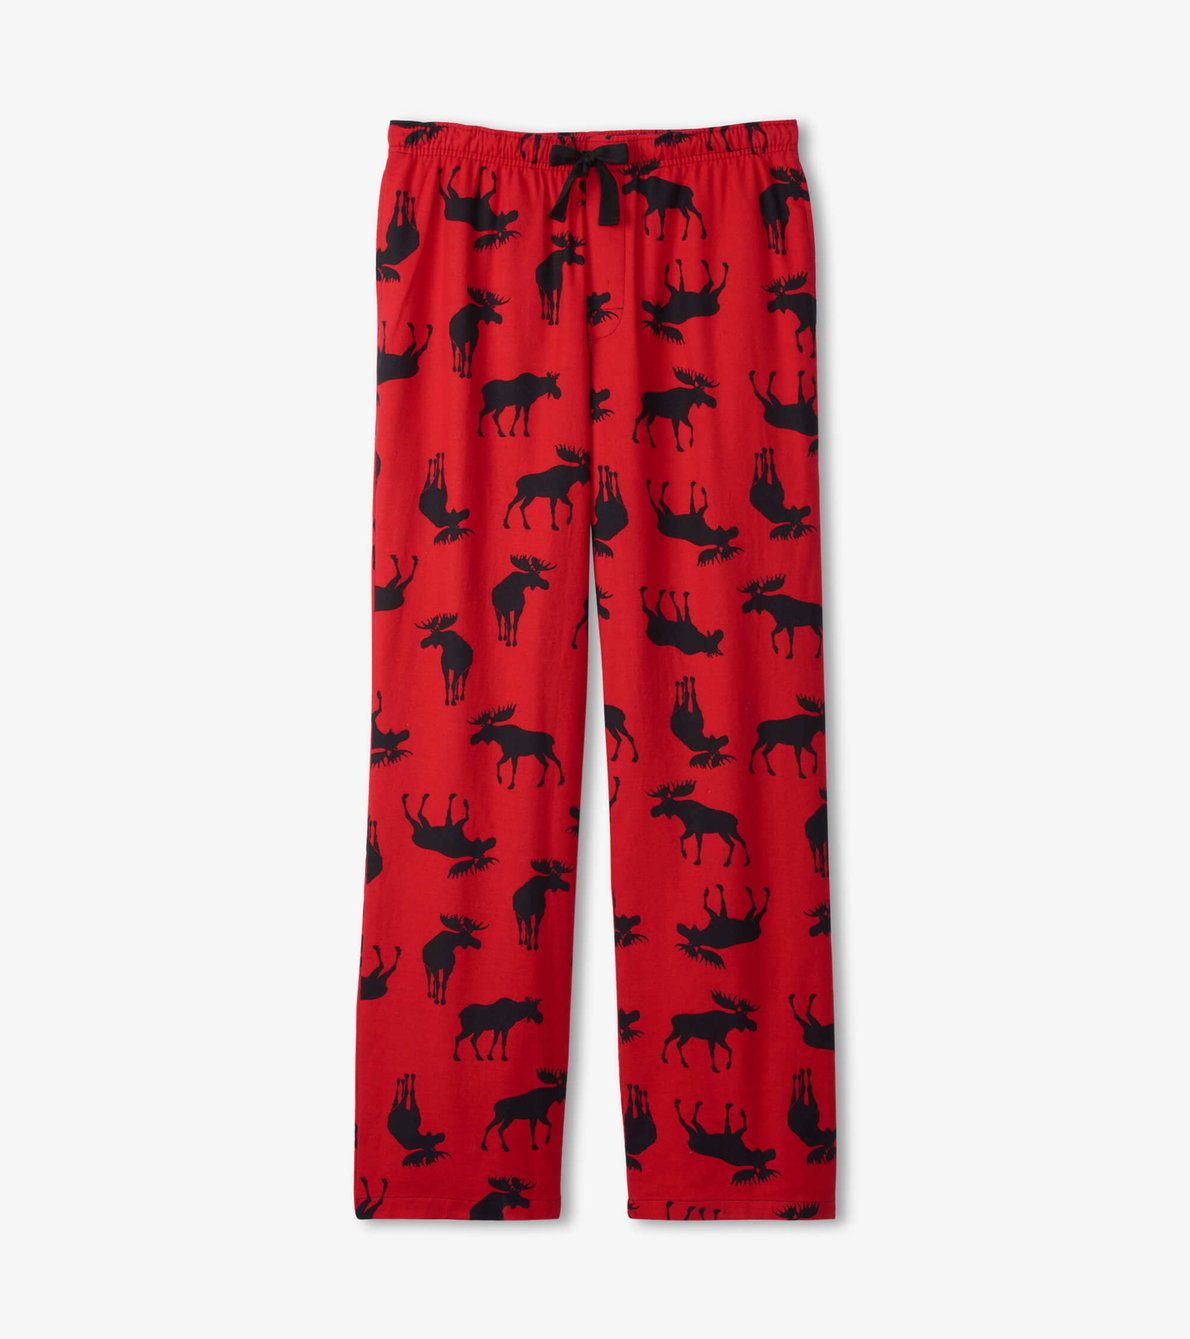 View larger image of Men's Moose On Red Flannel Pajama Pants